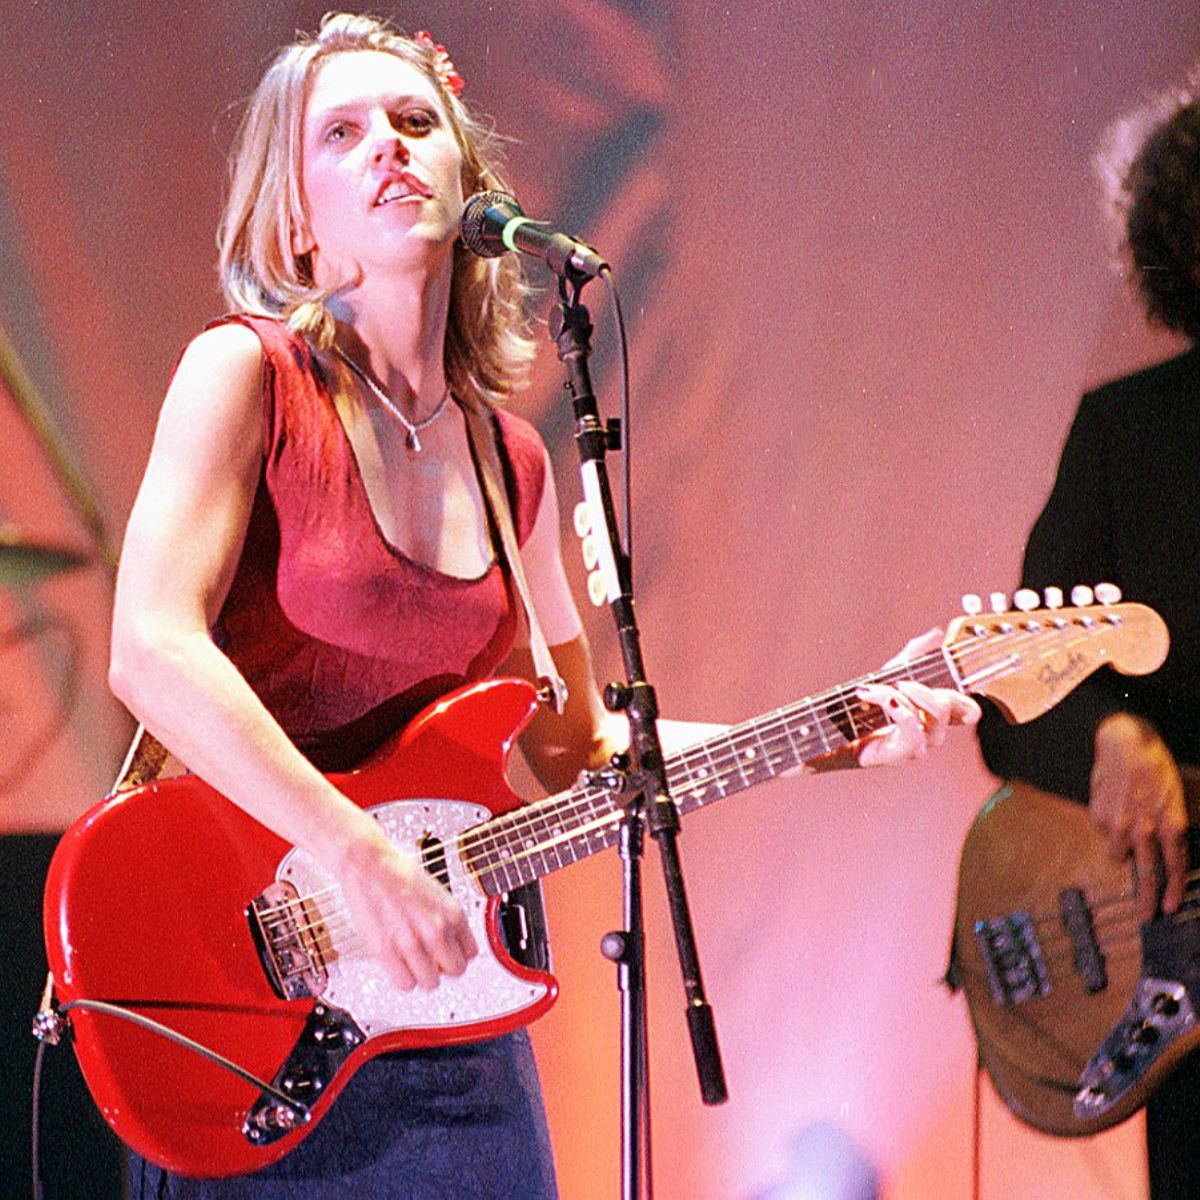 How old is Liz Phair